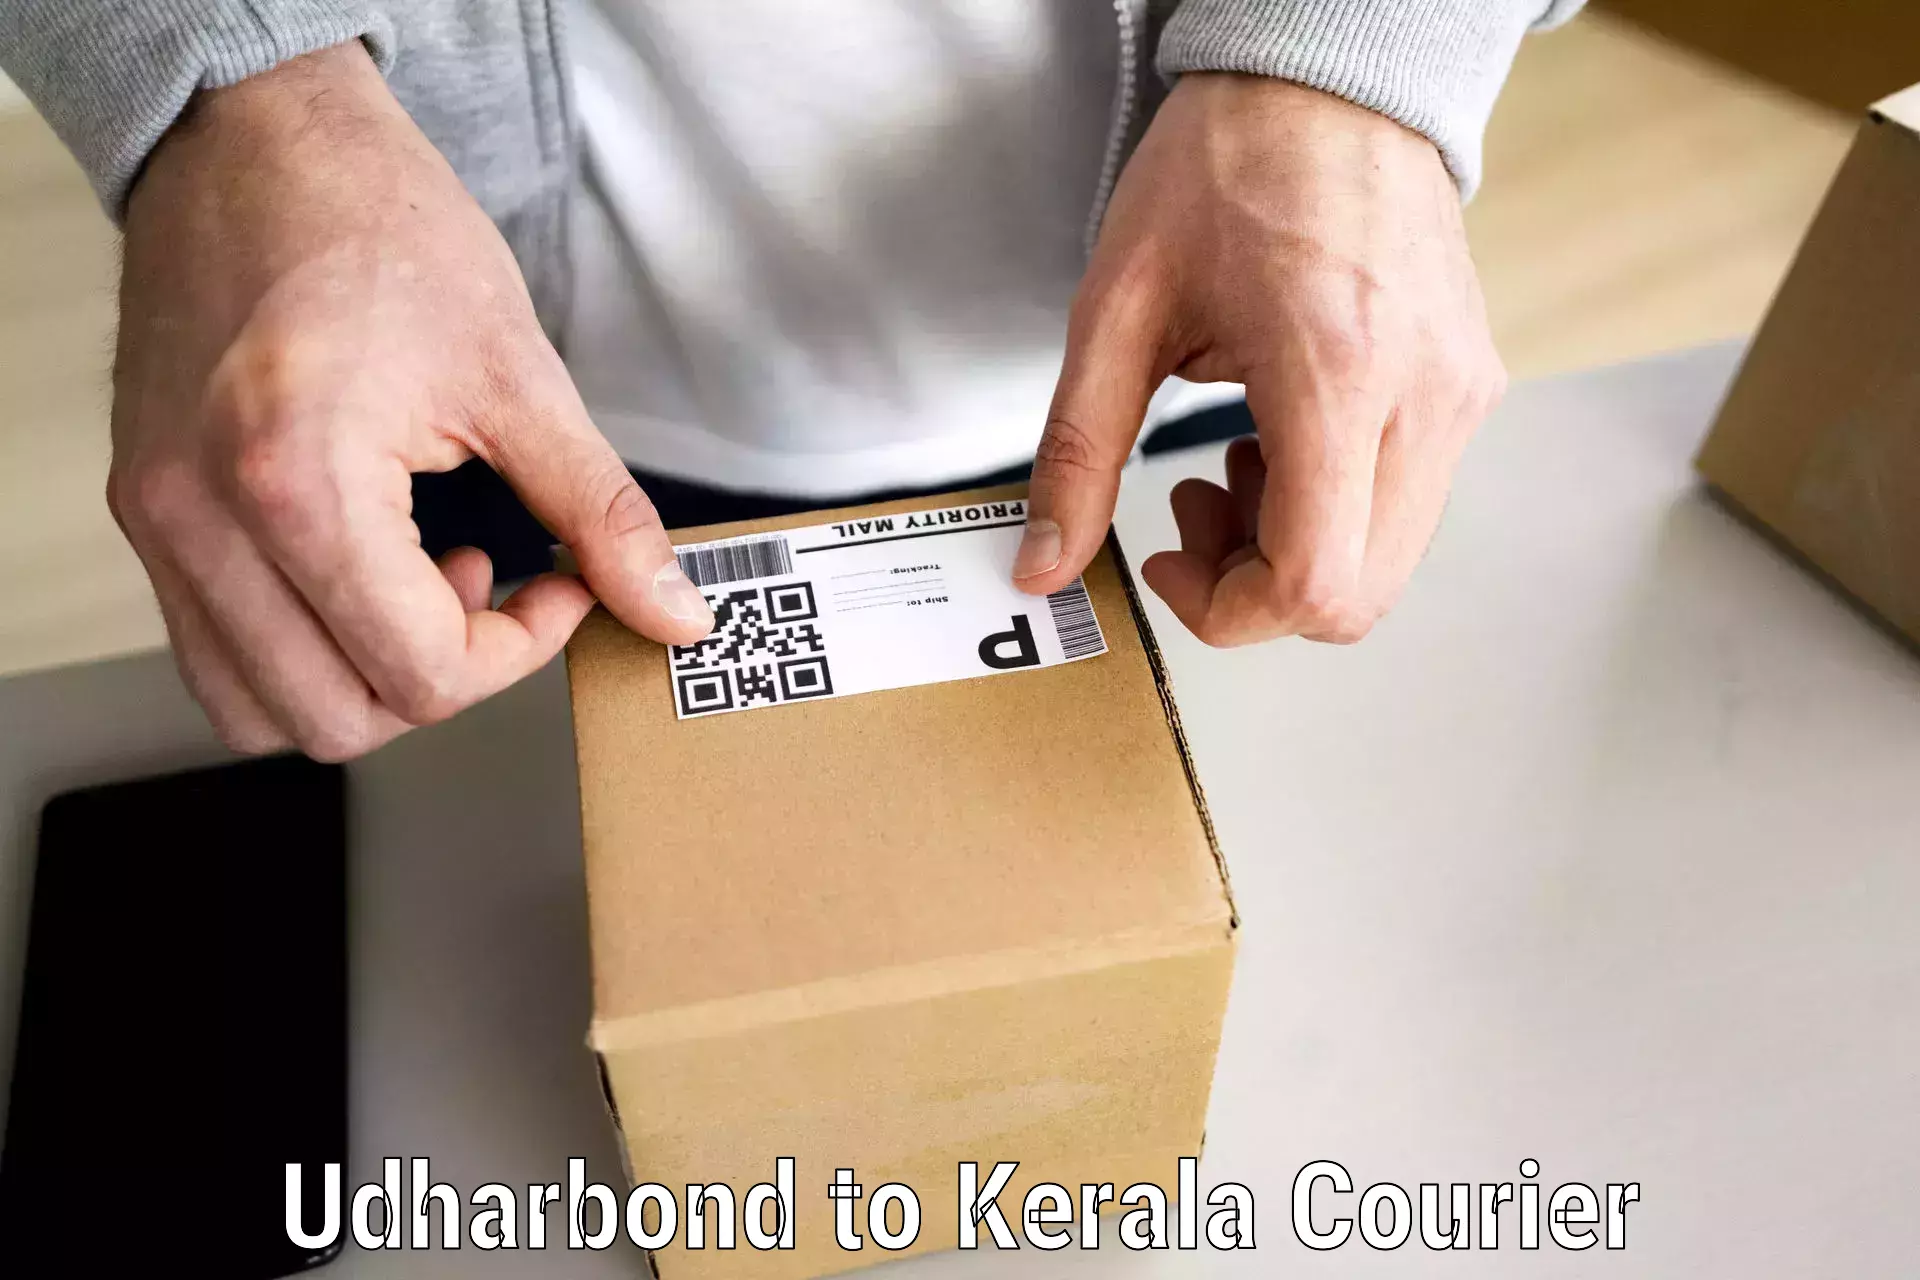 Household goods movers and packers Udharbond to Trivandrum